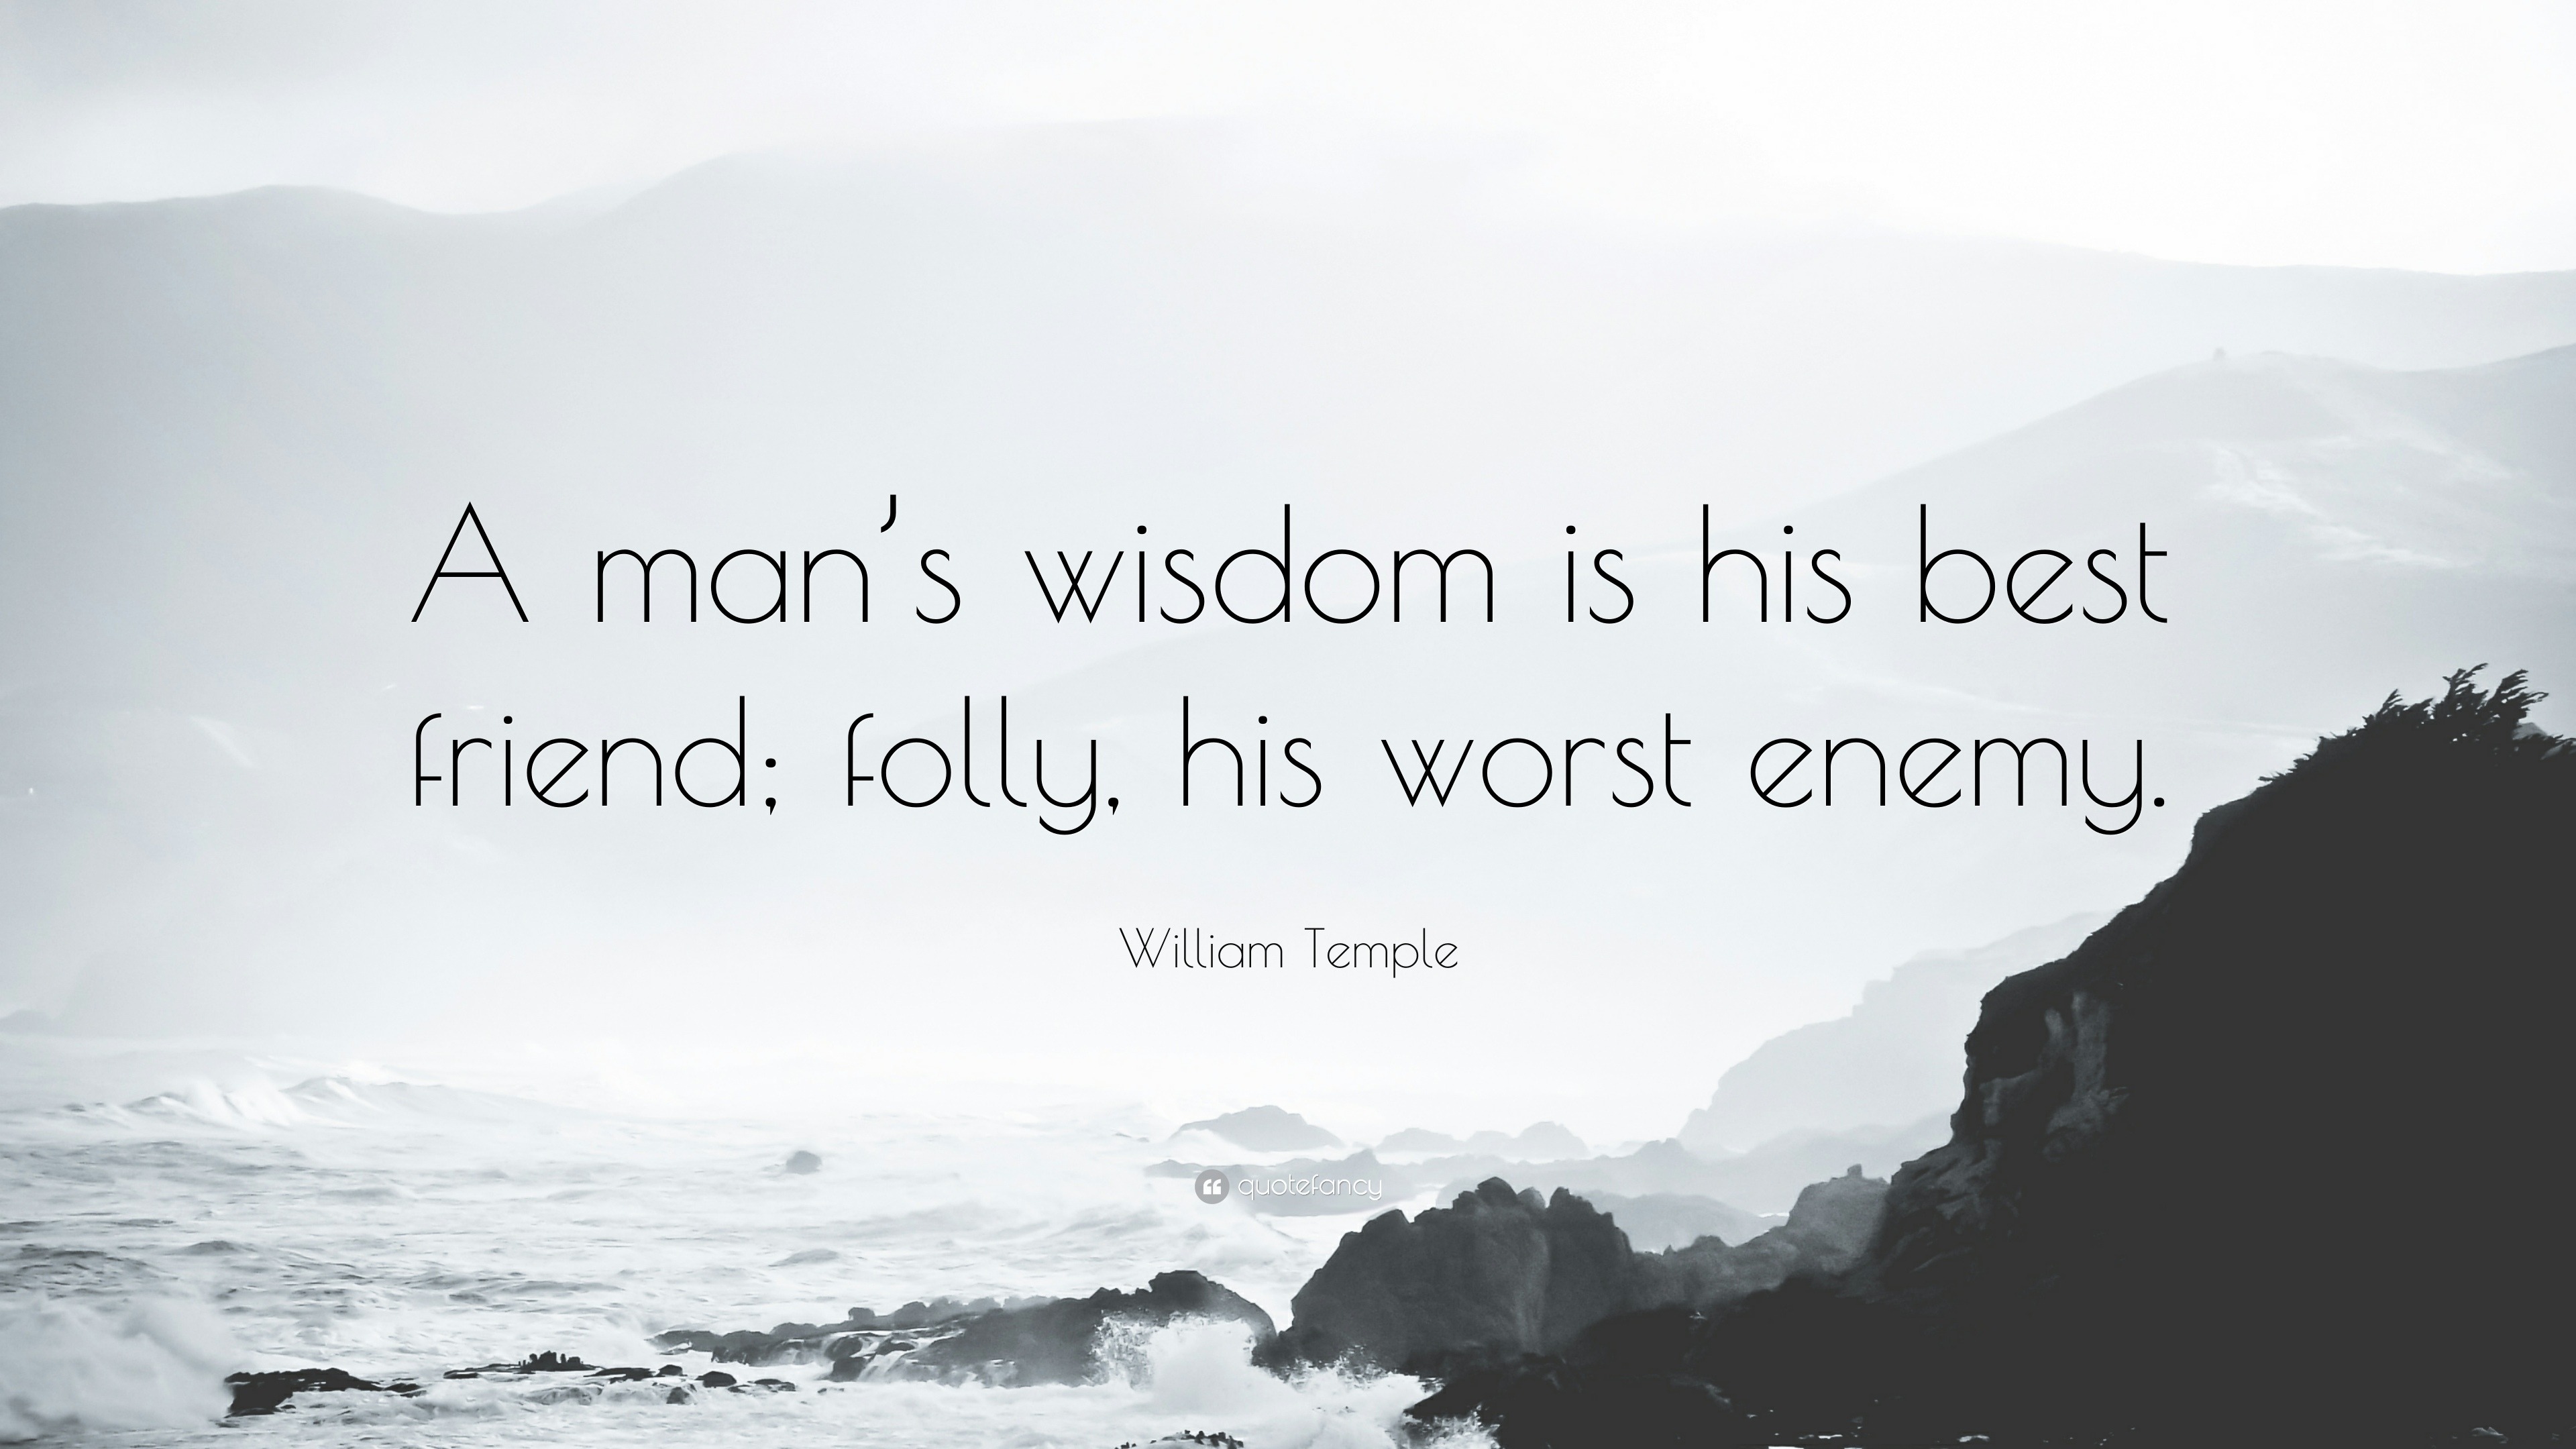 Man’s wisdom is his best friend; folly his worst enemy.